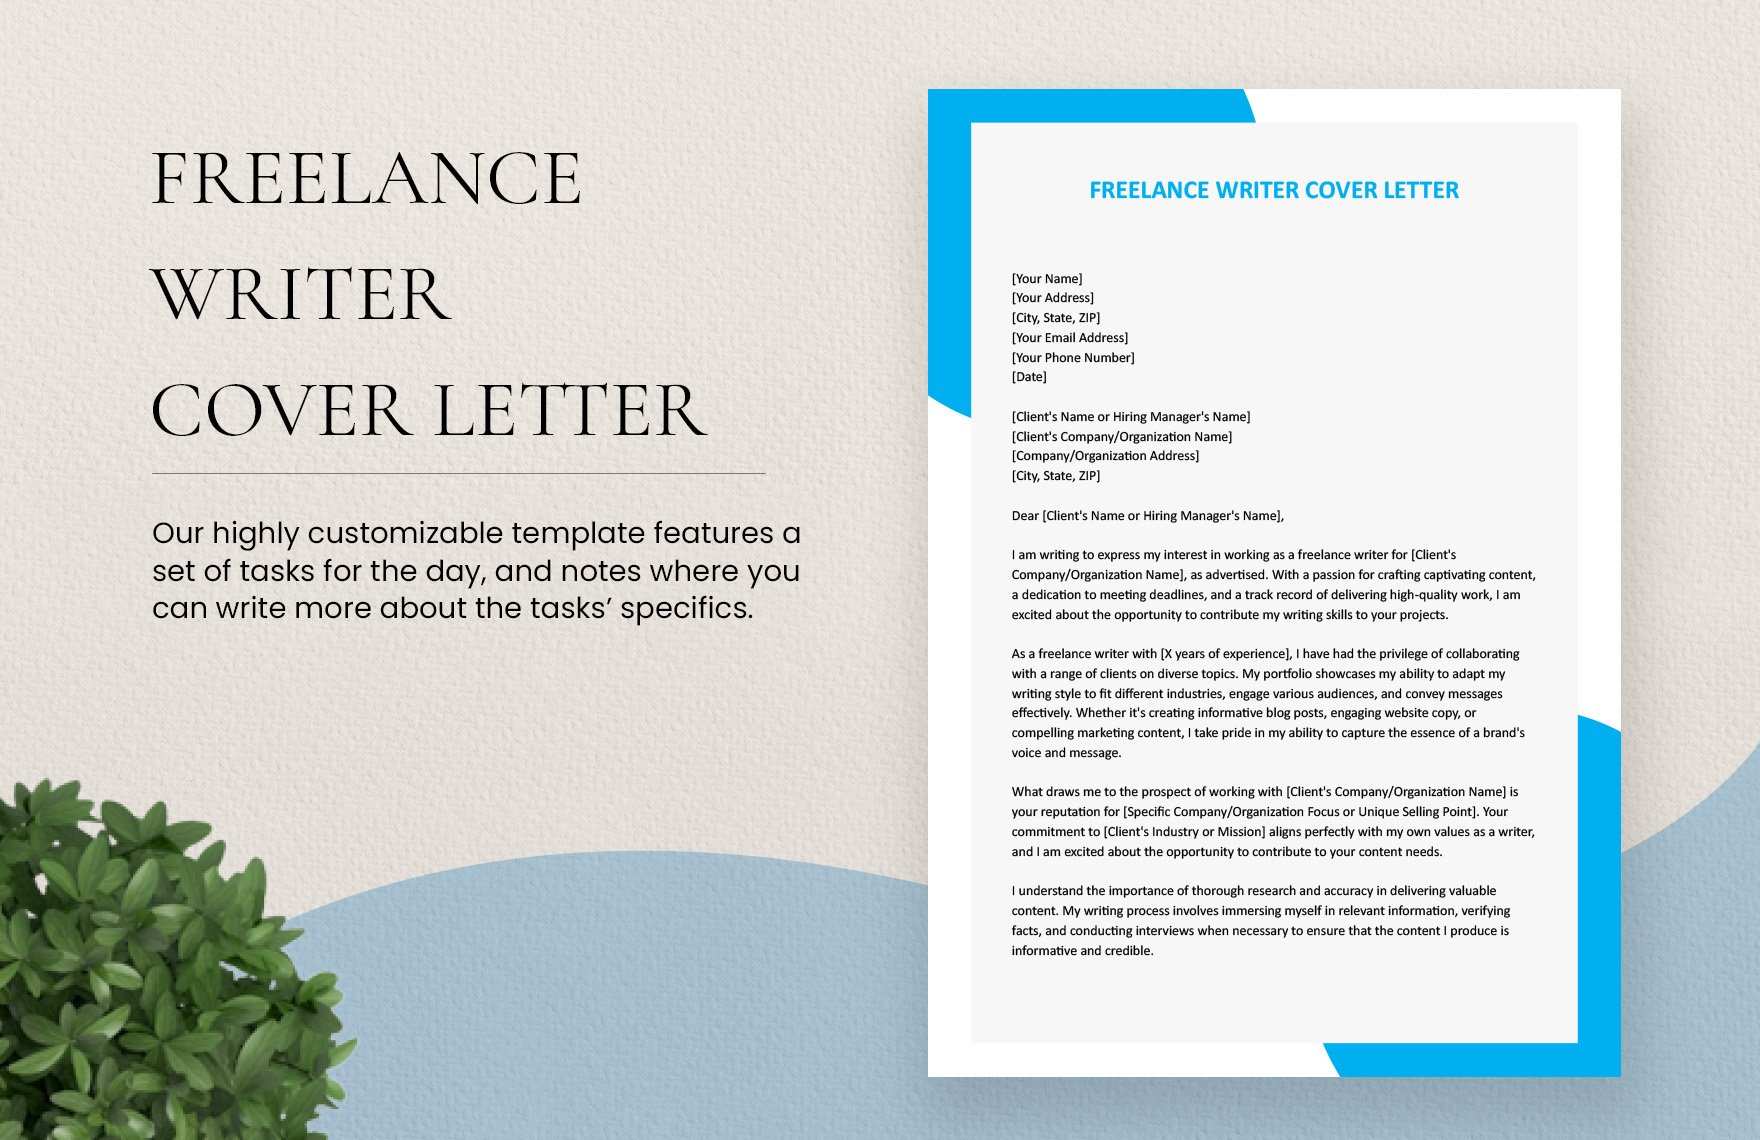 Freelance Writer Cover Letter in Word, Google Docs, Apple Pages